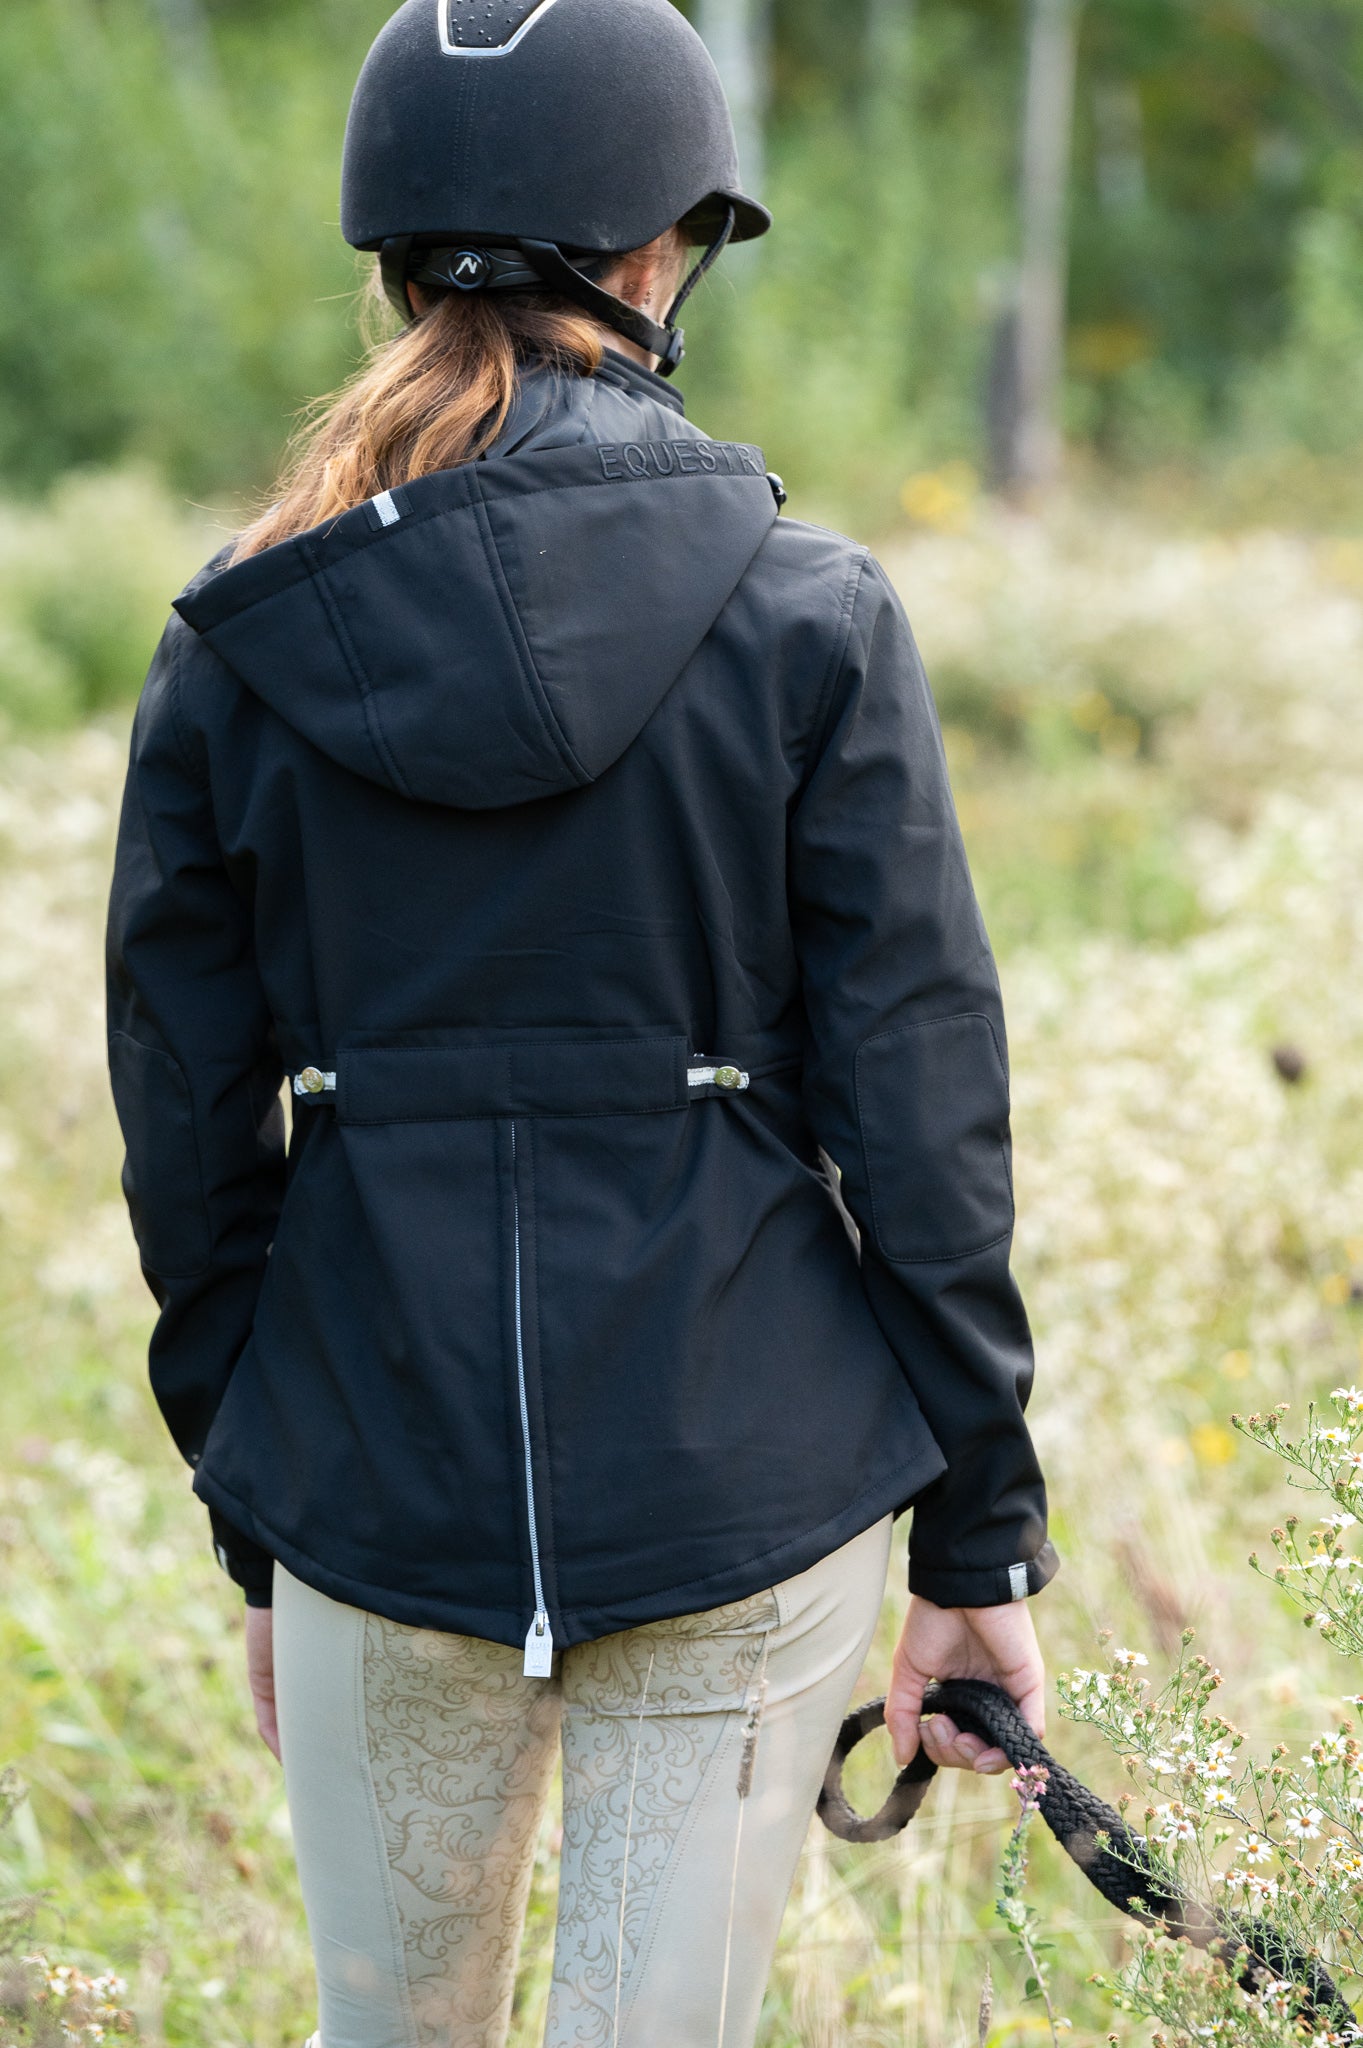 Bromont All Weather Softshell Jacket - Black With Silver Zipper